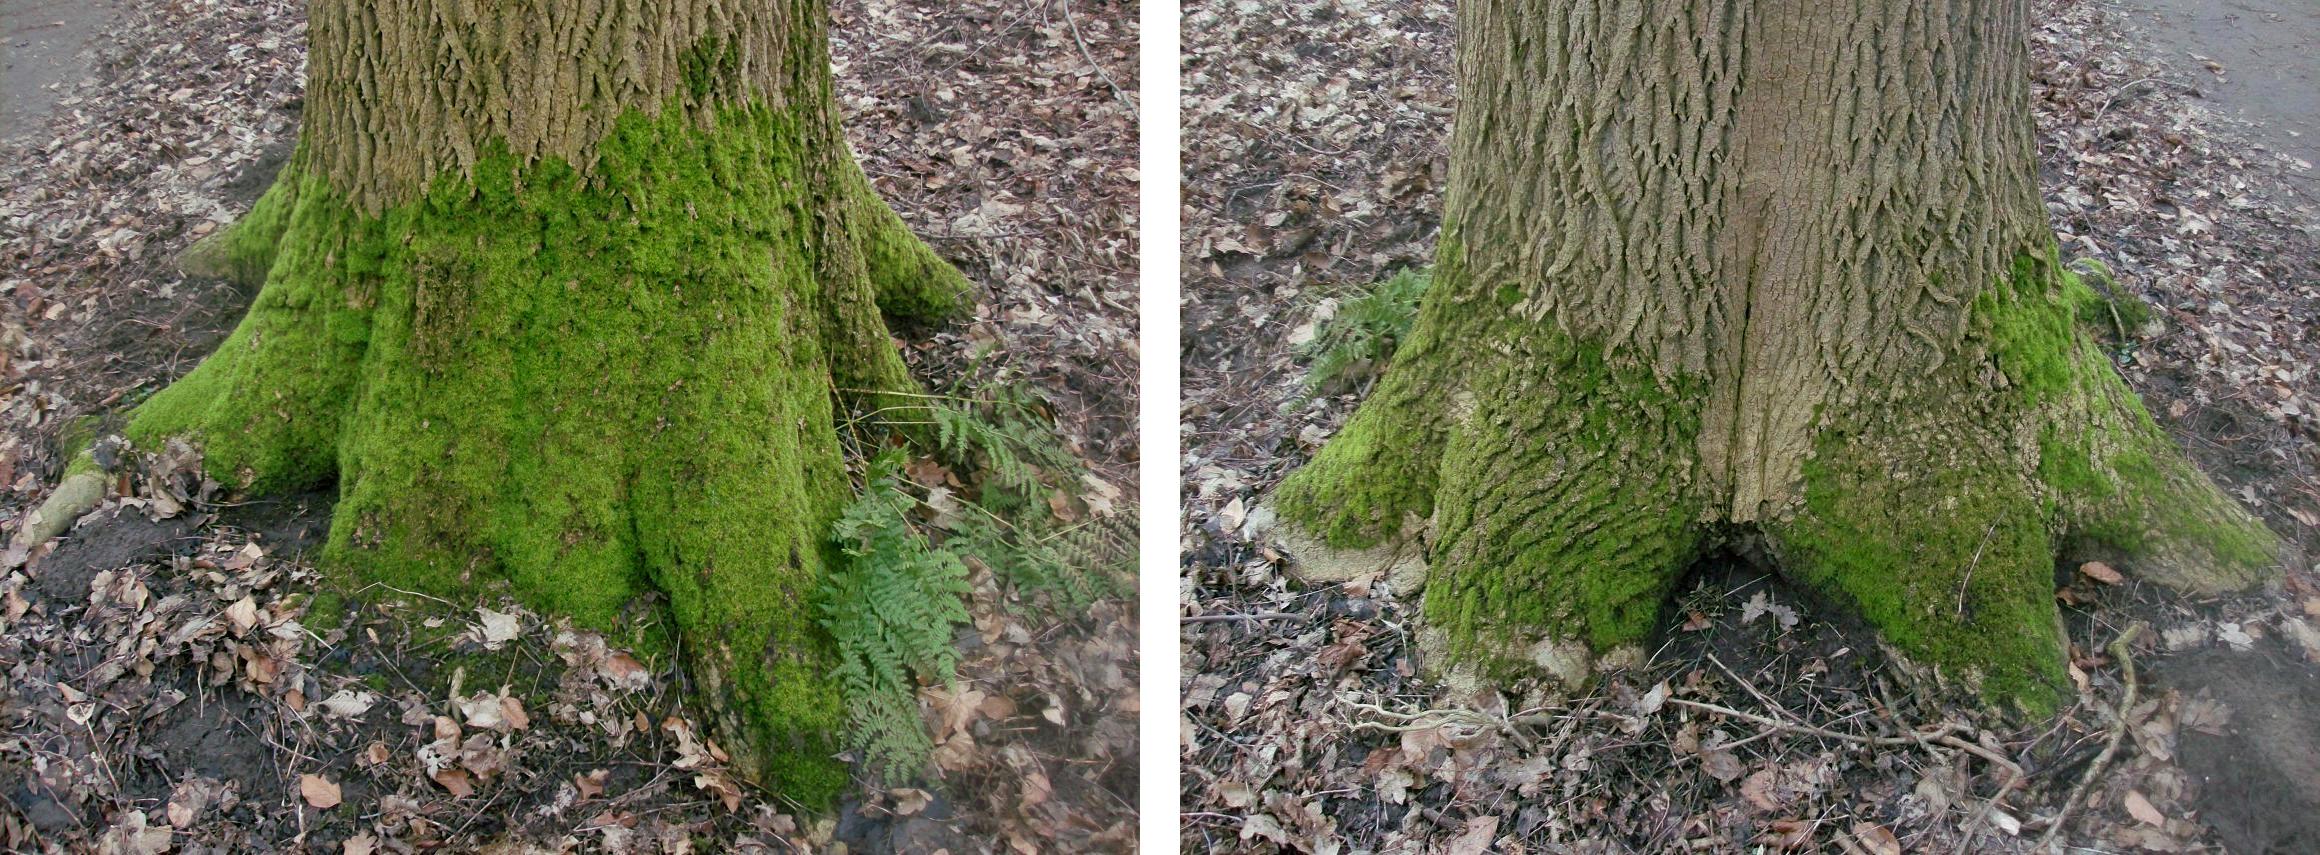 File:Moss on a tree trunk as an indicator of direction.jpg ...